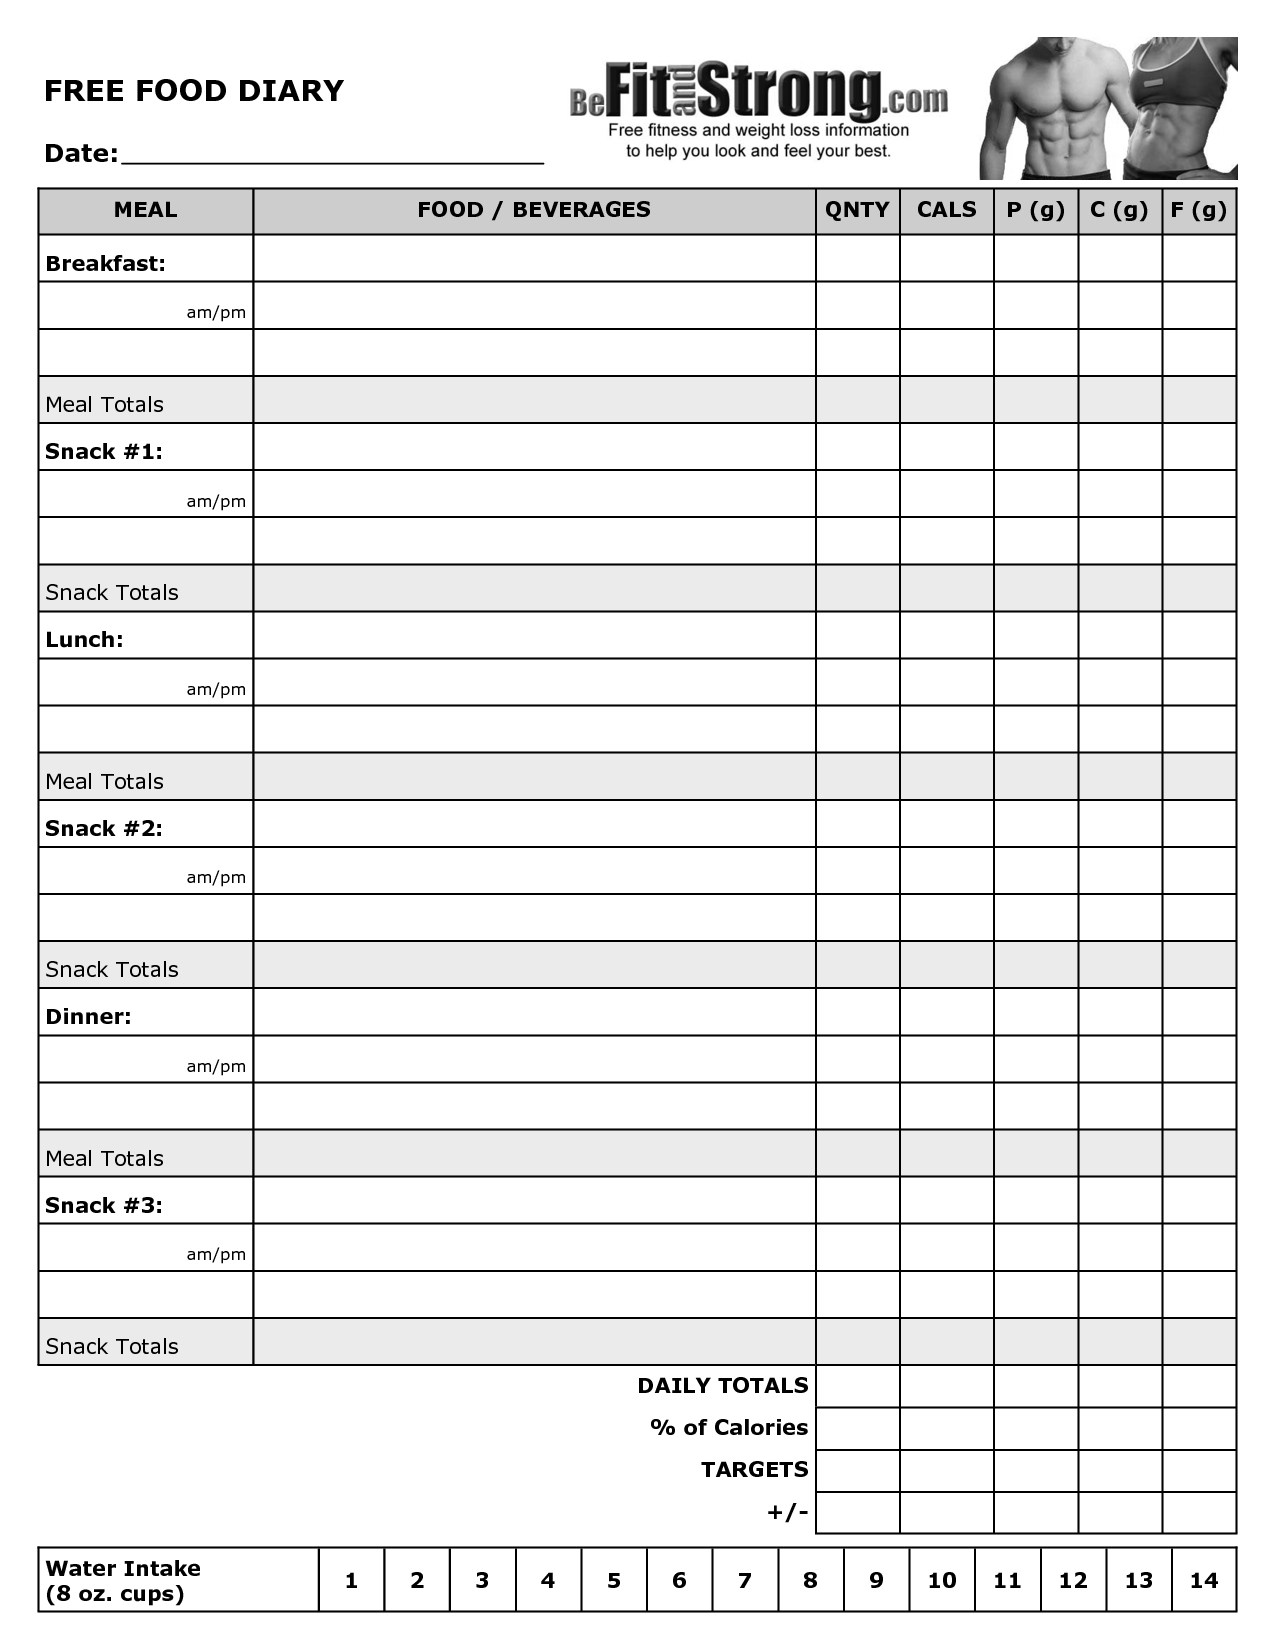 Free Printable Food Diary Template | Health, Fitness &amp;amp; Weight Loss - Free Printable Calorie Counter Sheet